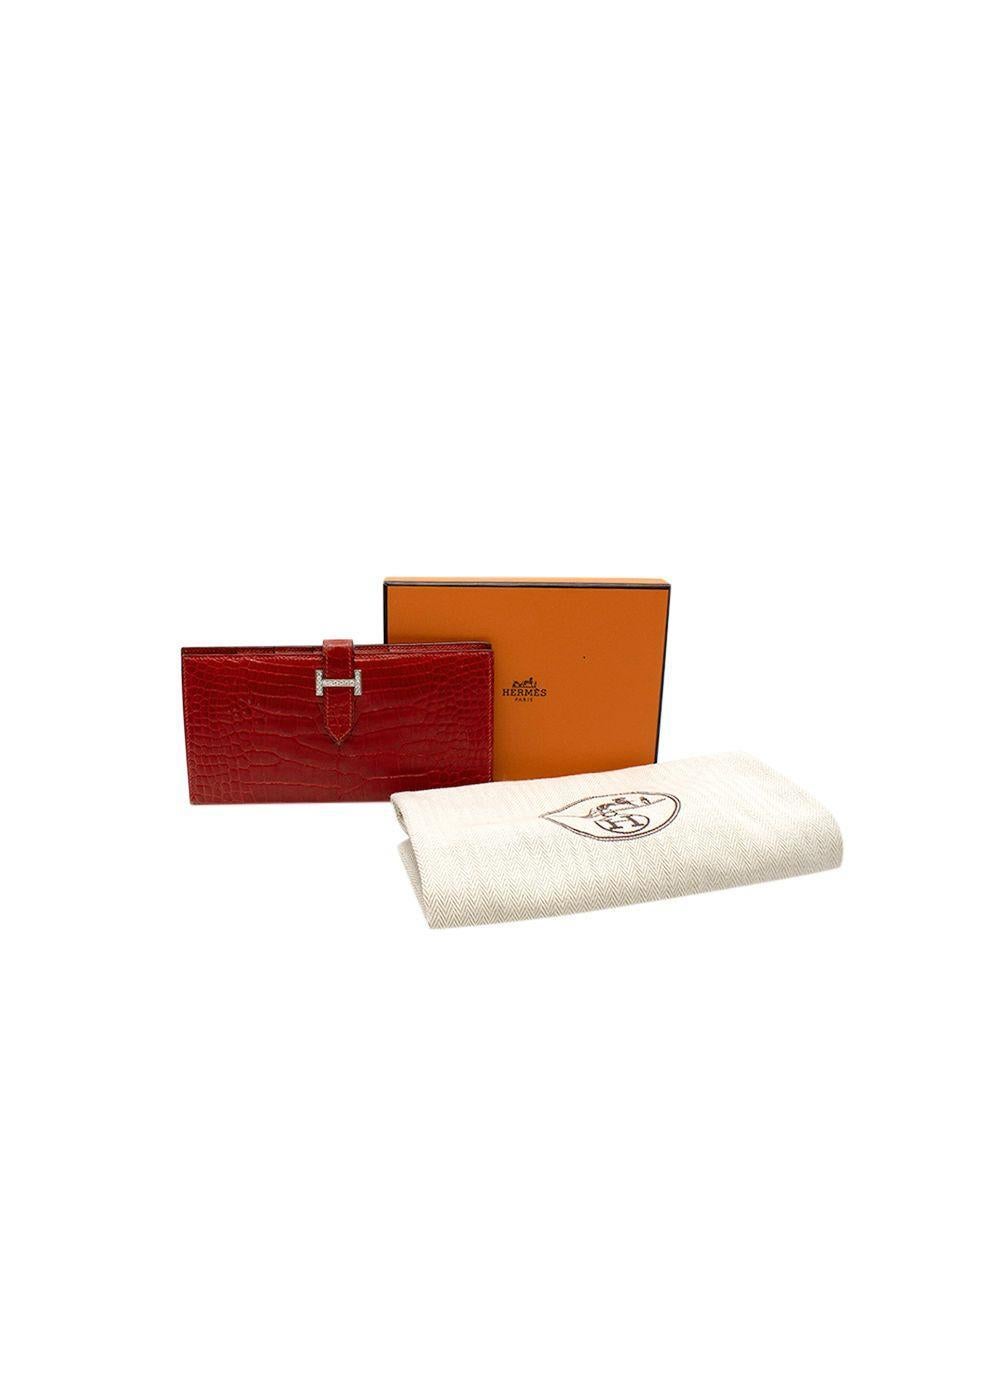 Hermes Red Shiny Crocodile Bearn Wallet in alligator crocodile, hardware is in 18 K white gold and diamond hardware, with 16 brilliant cut diamonds for a total diamond carat weight of 0.80 set in 6.50g of white gold.
Date stamp (J in square),
Year